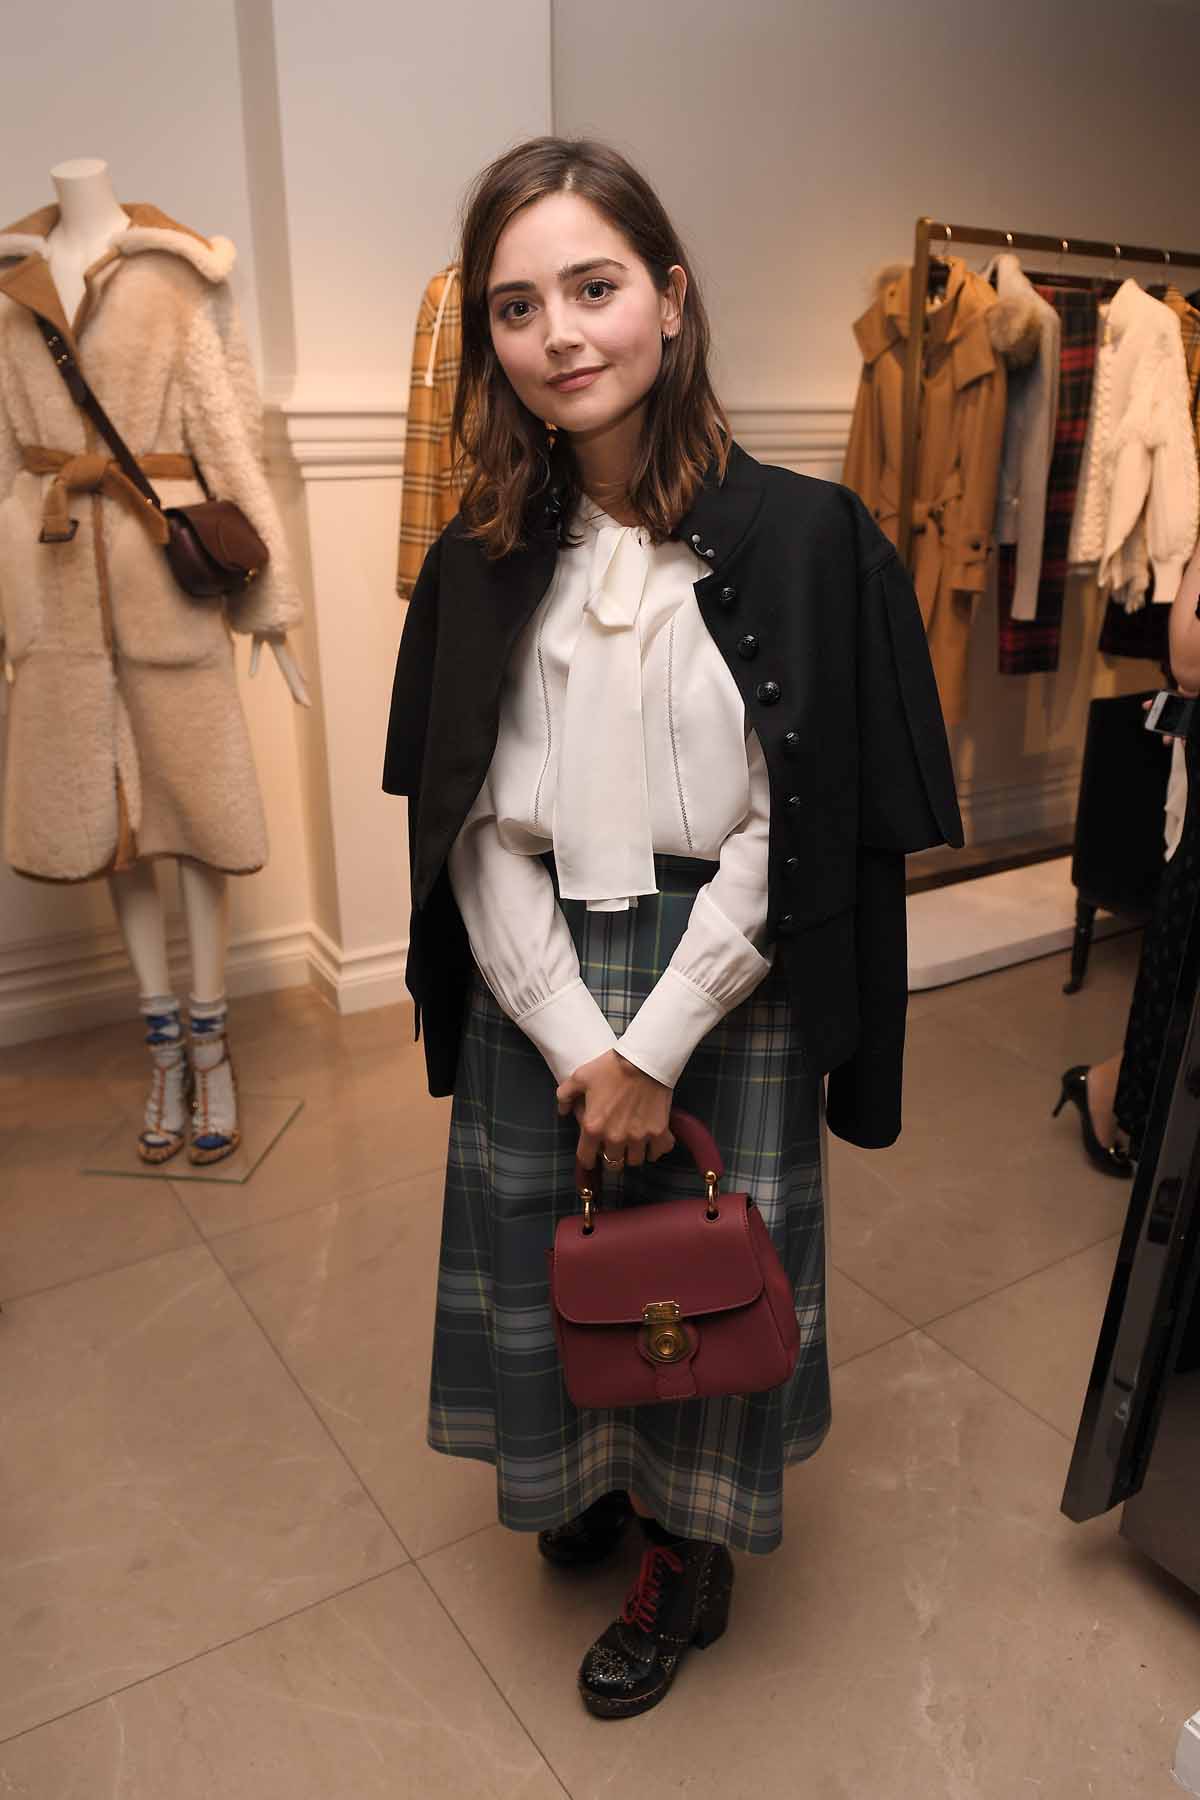 Anyone know what bag Jenna Coleman is carrying?? I MUST know